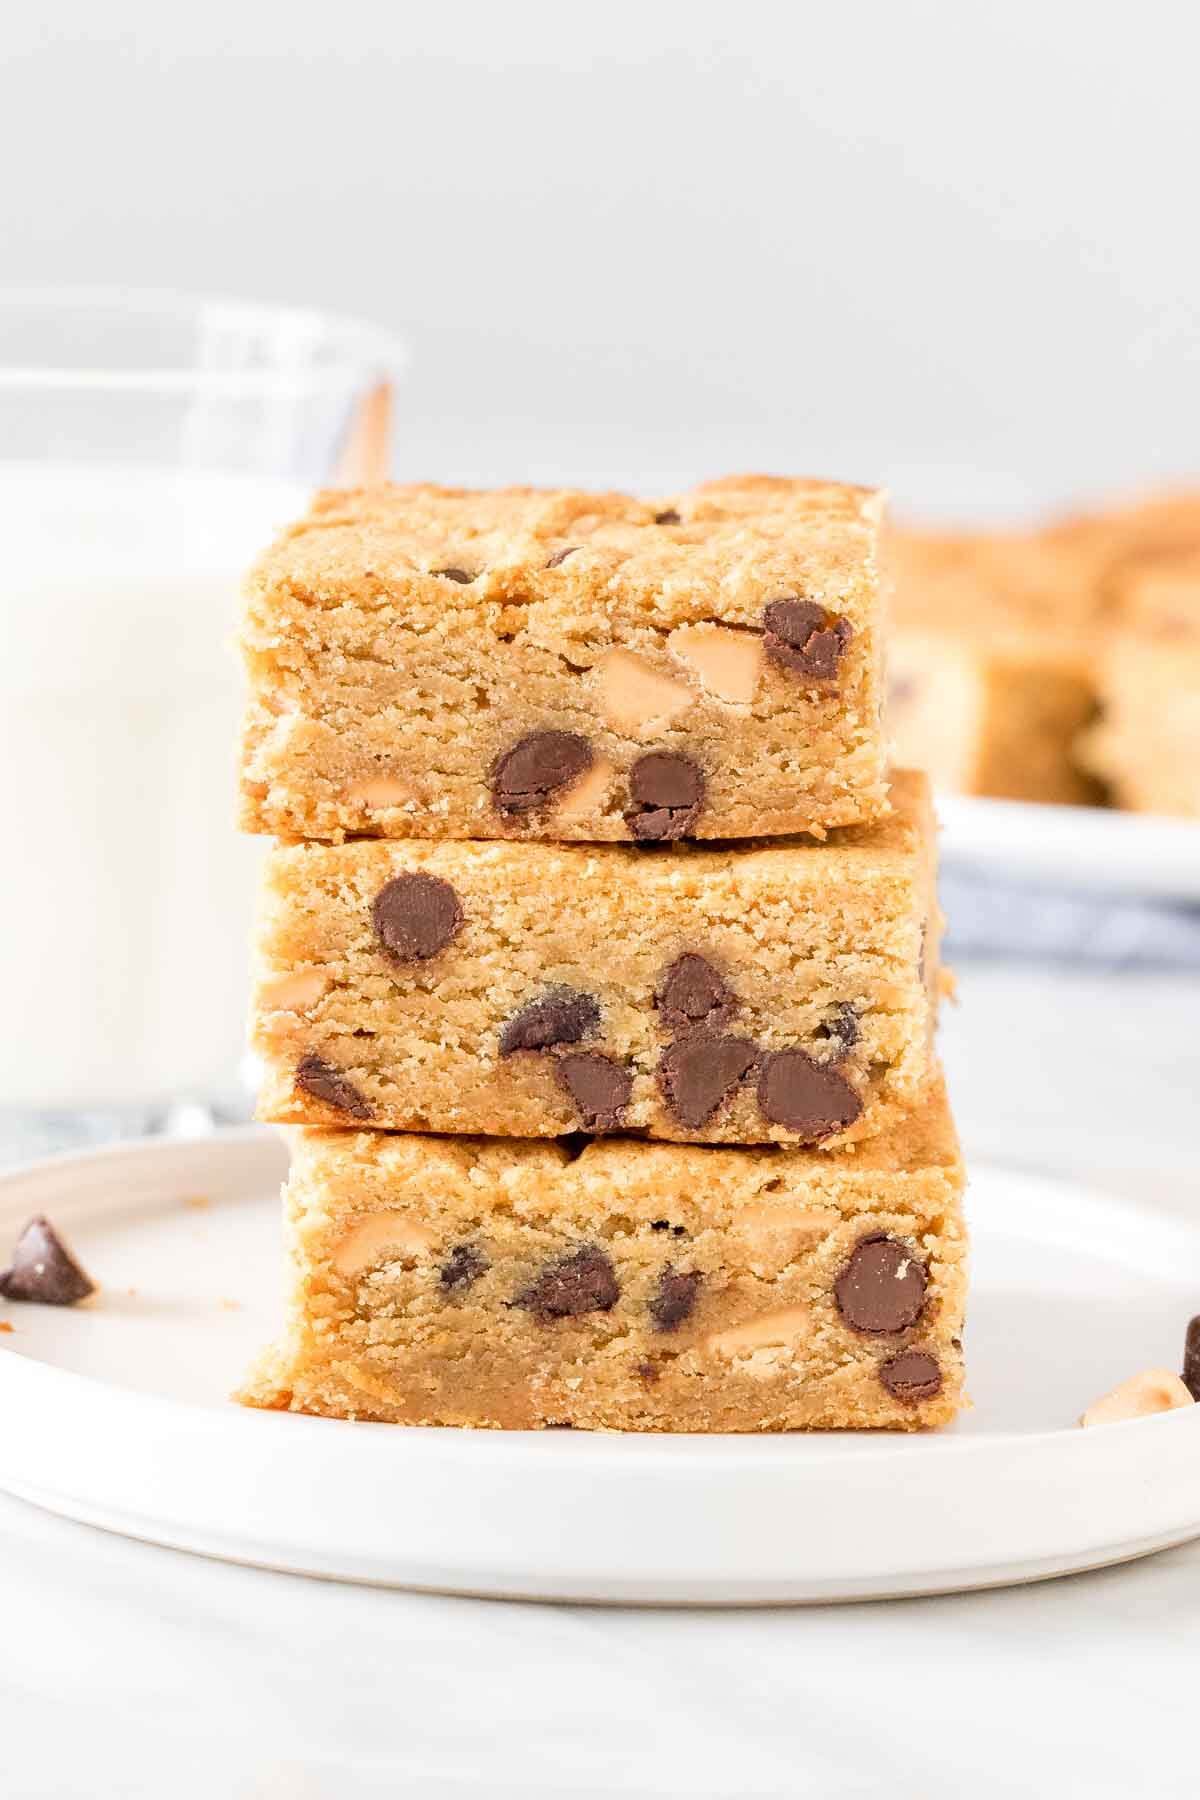 Stack of 3 peanut butter cookie bars with chocolate chips. 